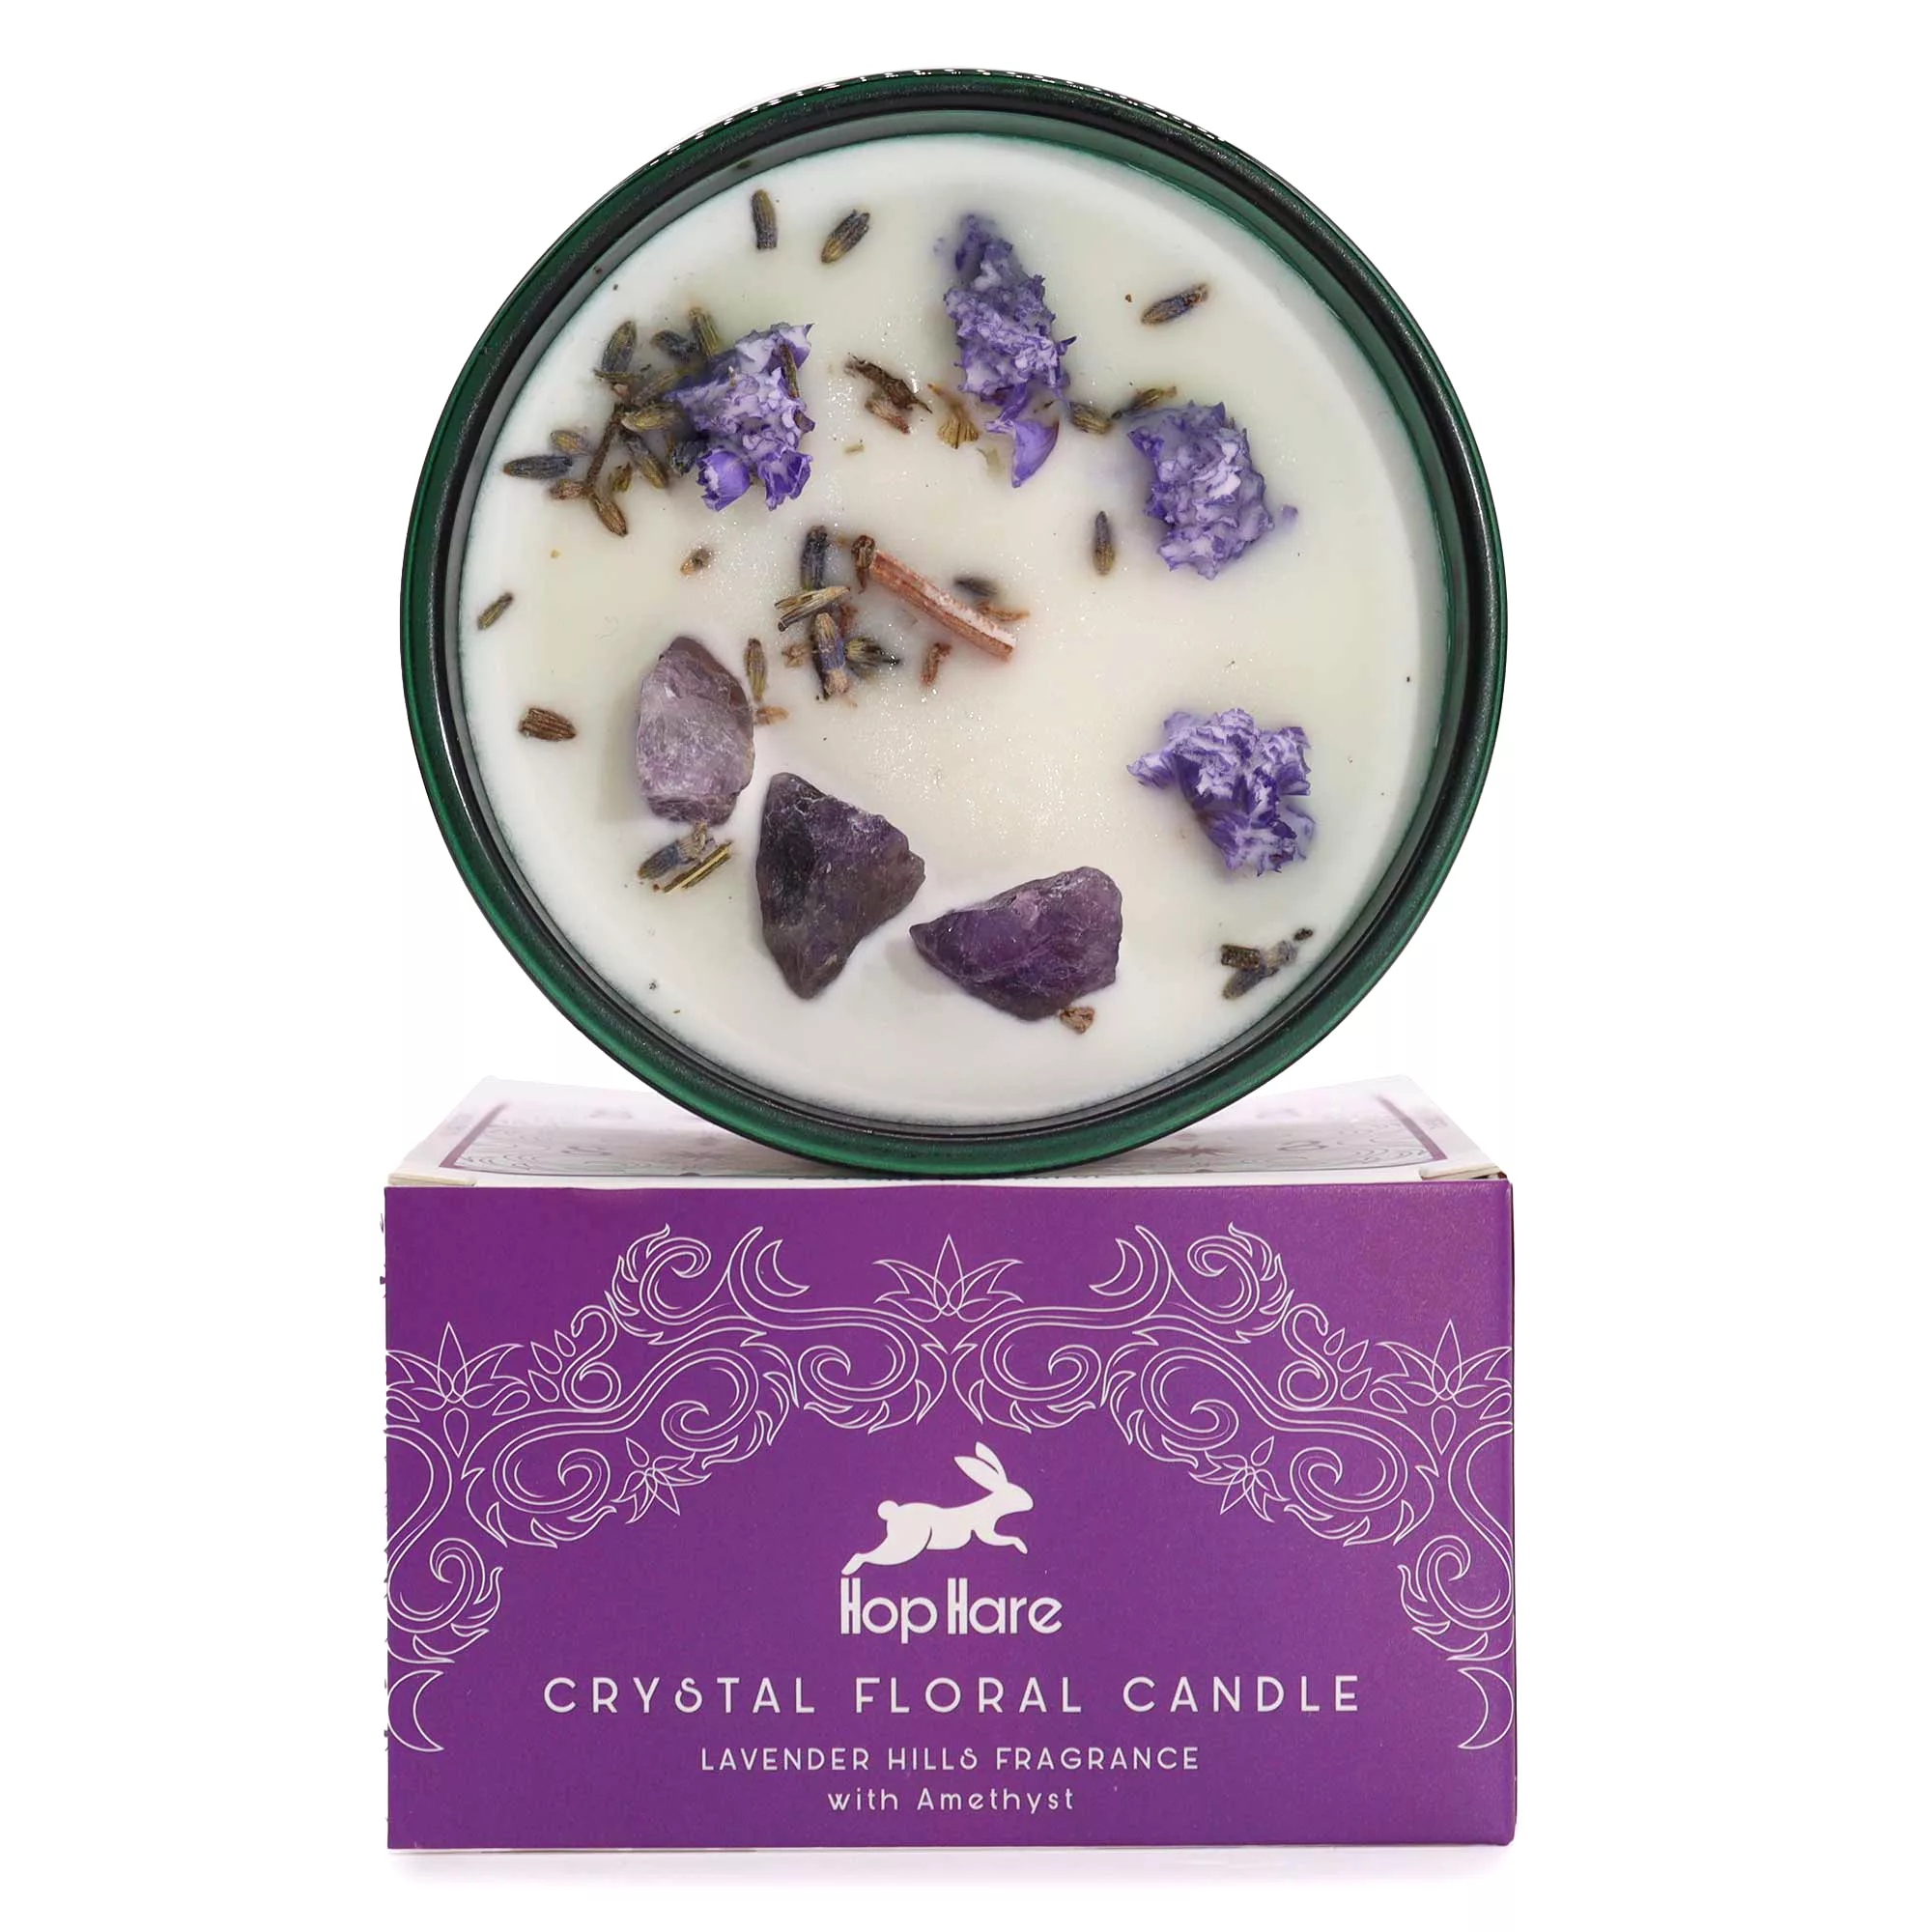 Hop Hare Crystal Magic Flower Candle – The Moon